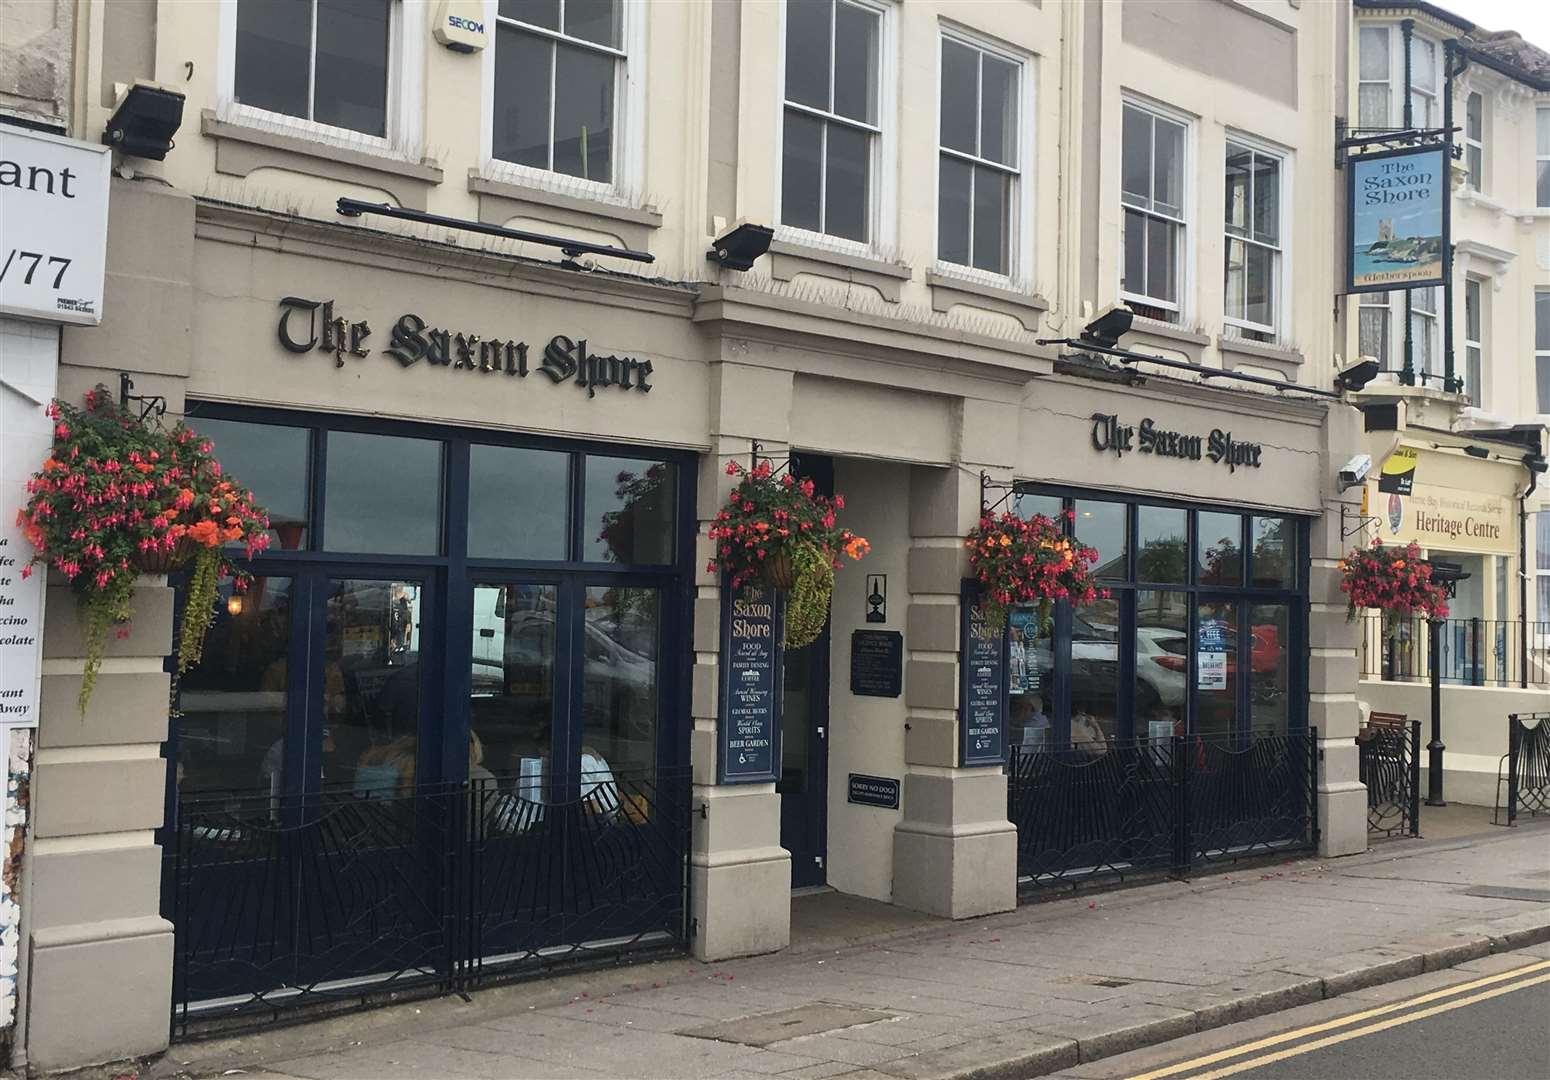 Wetherspoon bosses want to expand the Saxon Shore in Central Parade, Herne Bay